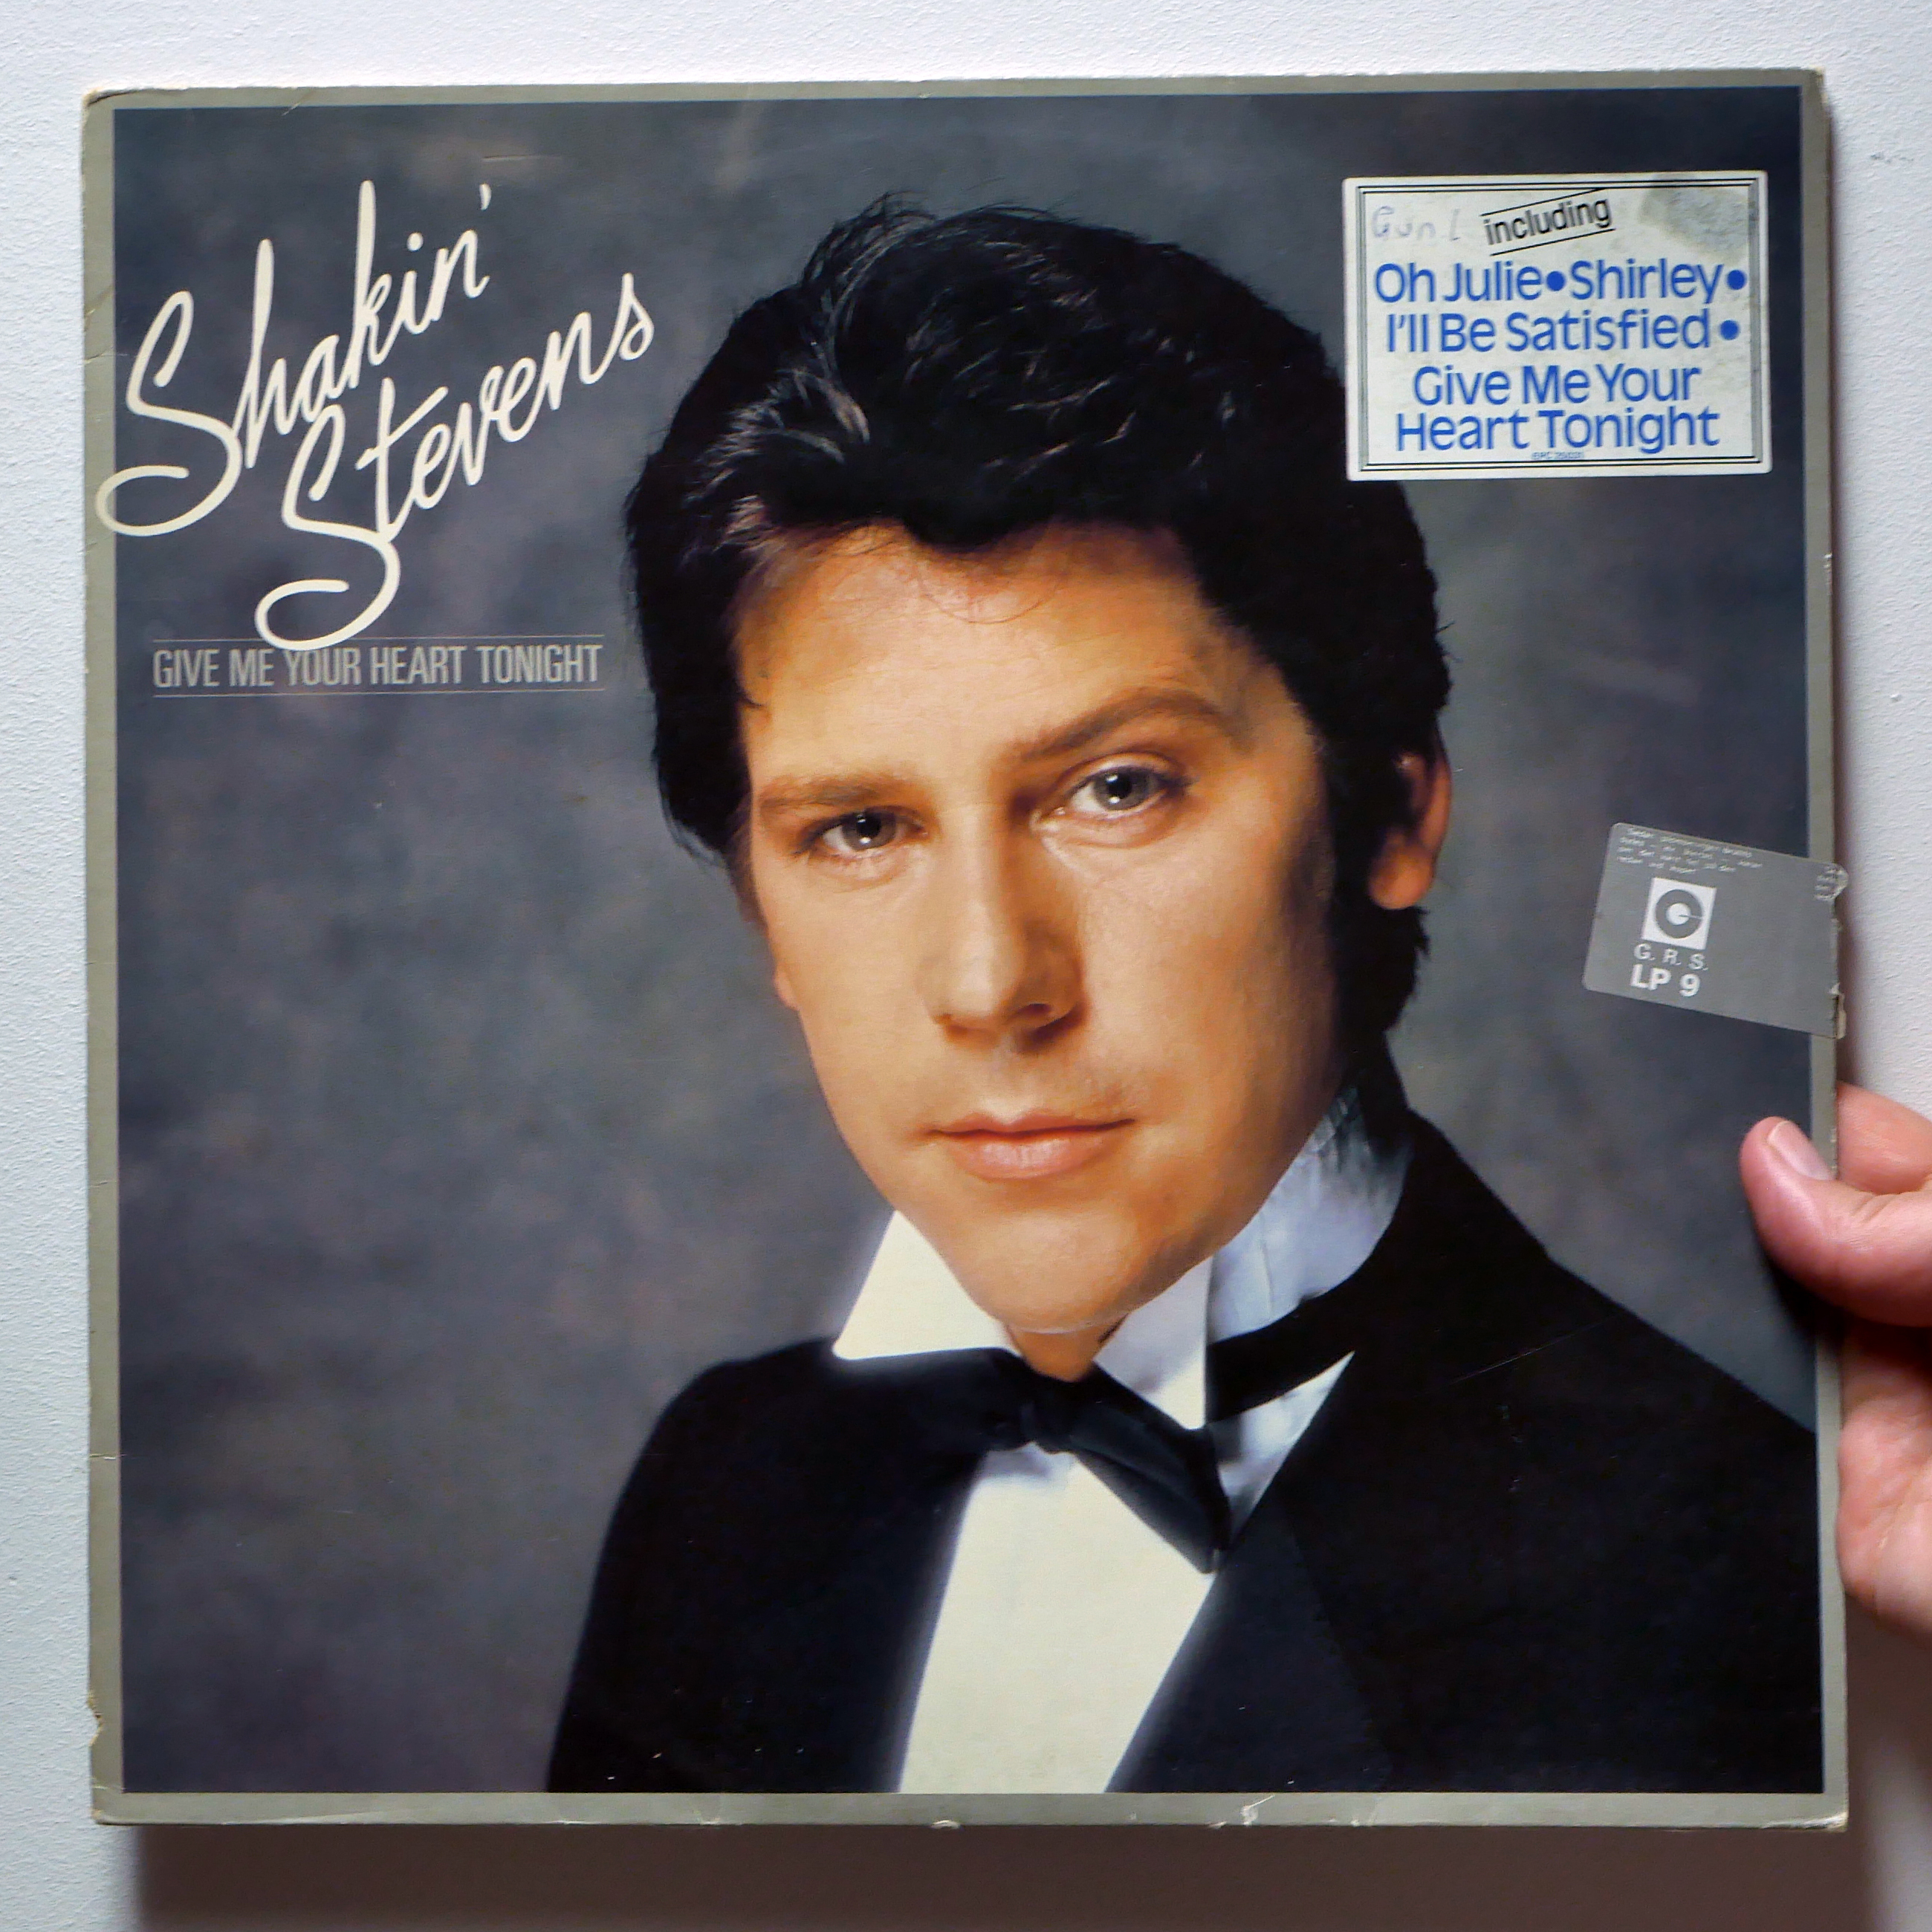 Shakin' Stevens – Give Me Your Heart Tonight [LP, 1982]